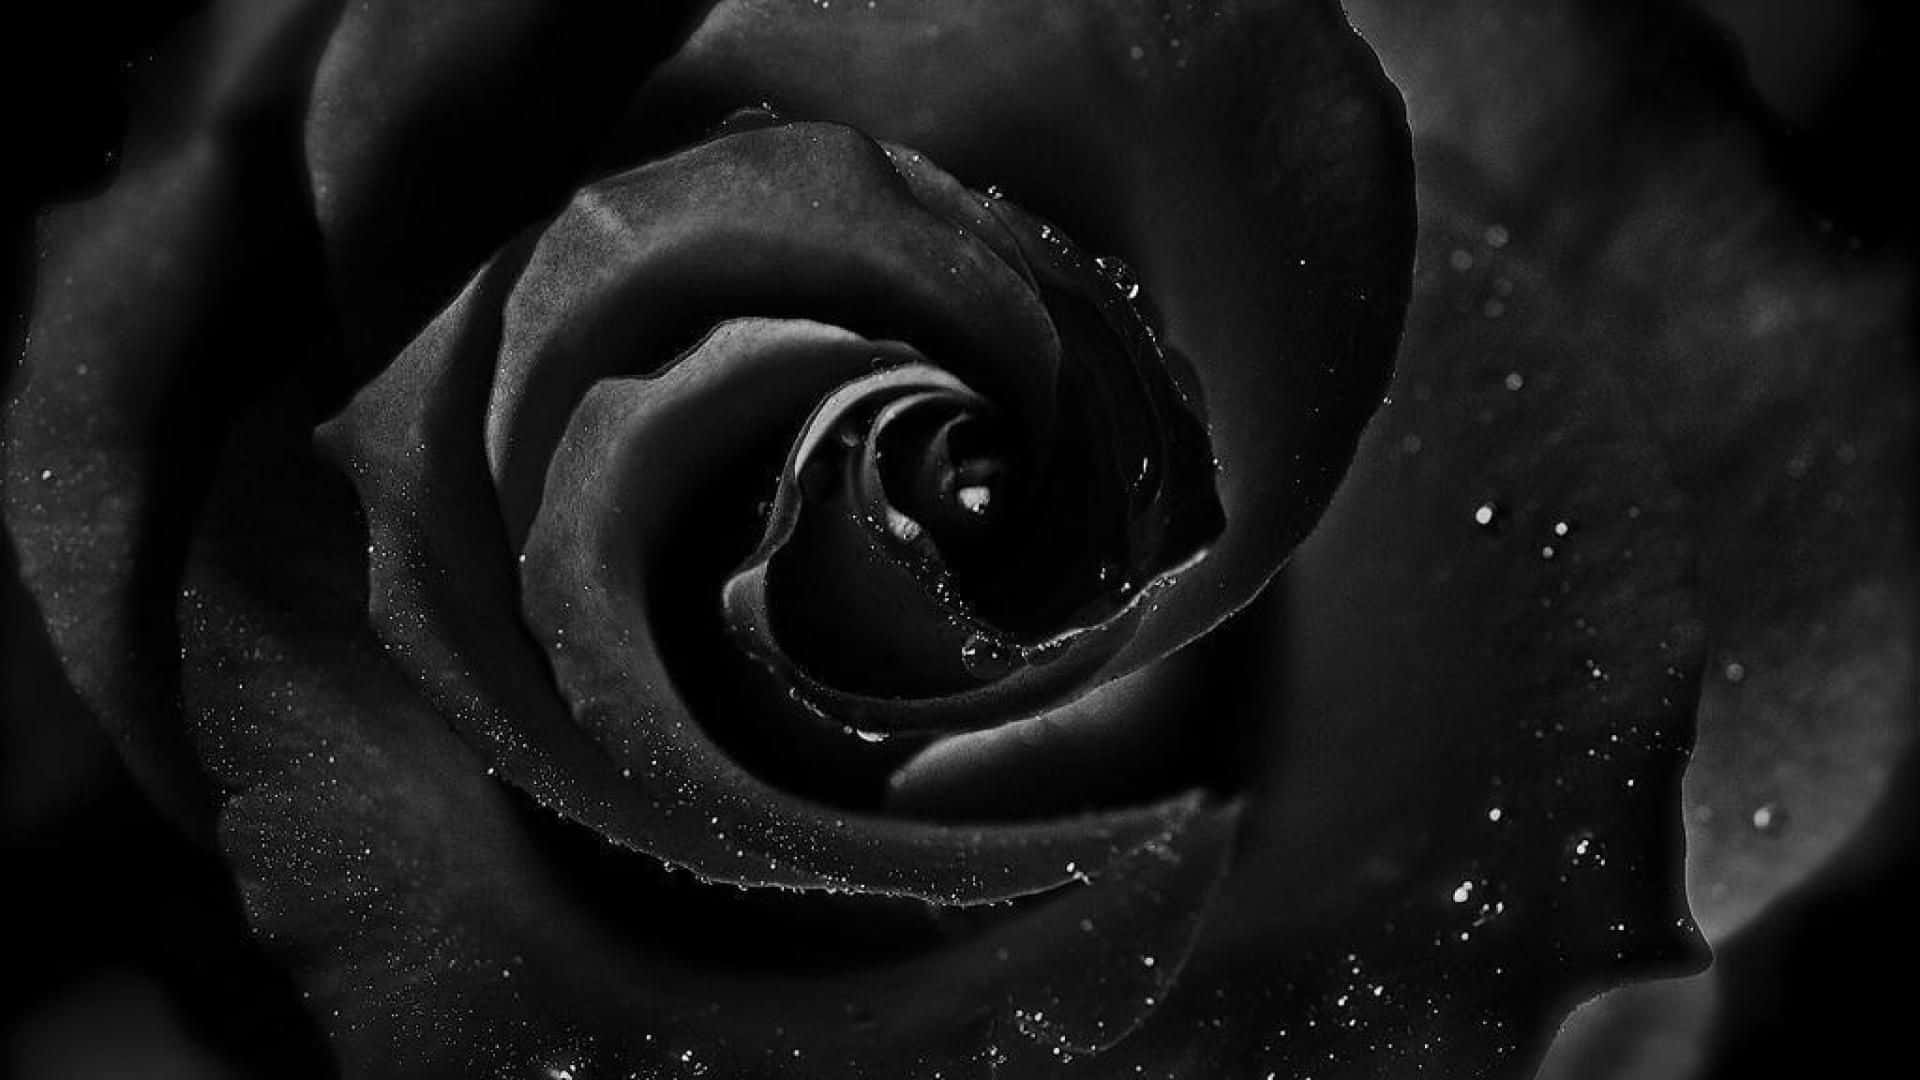 The Dark Beauty of the Black Rose